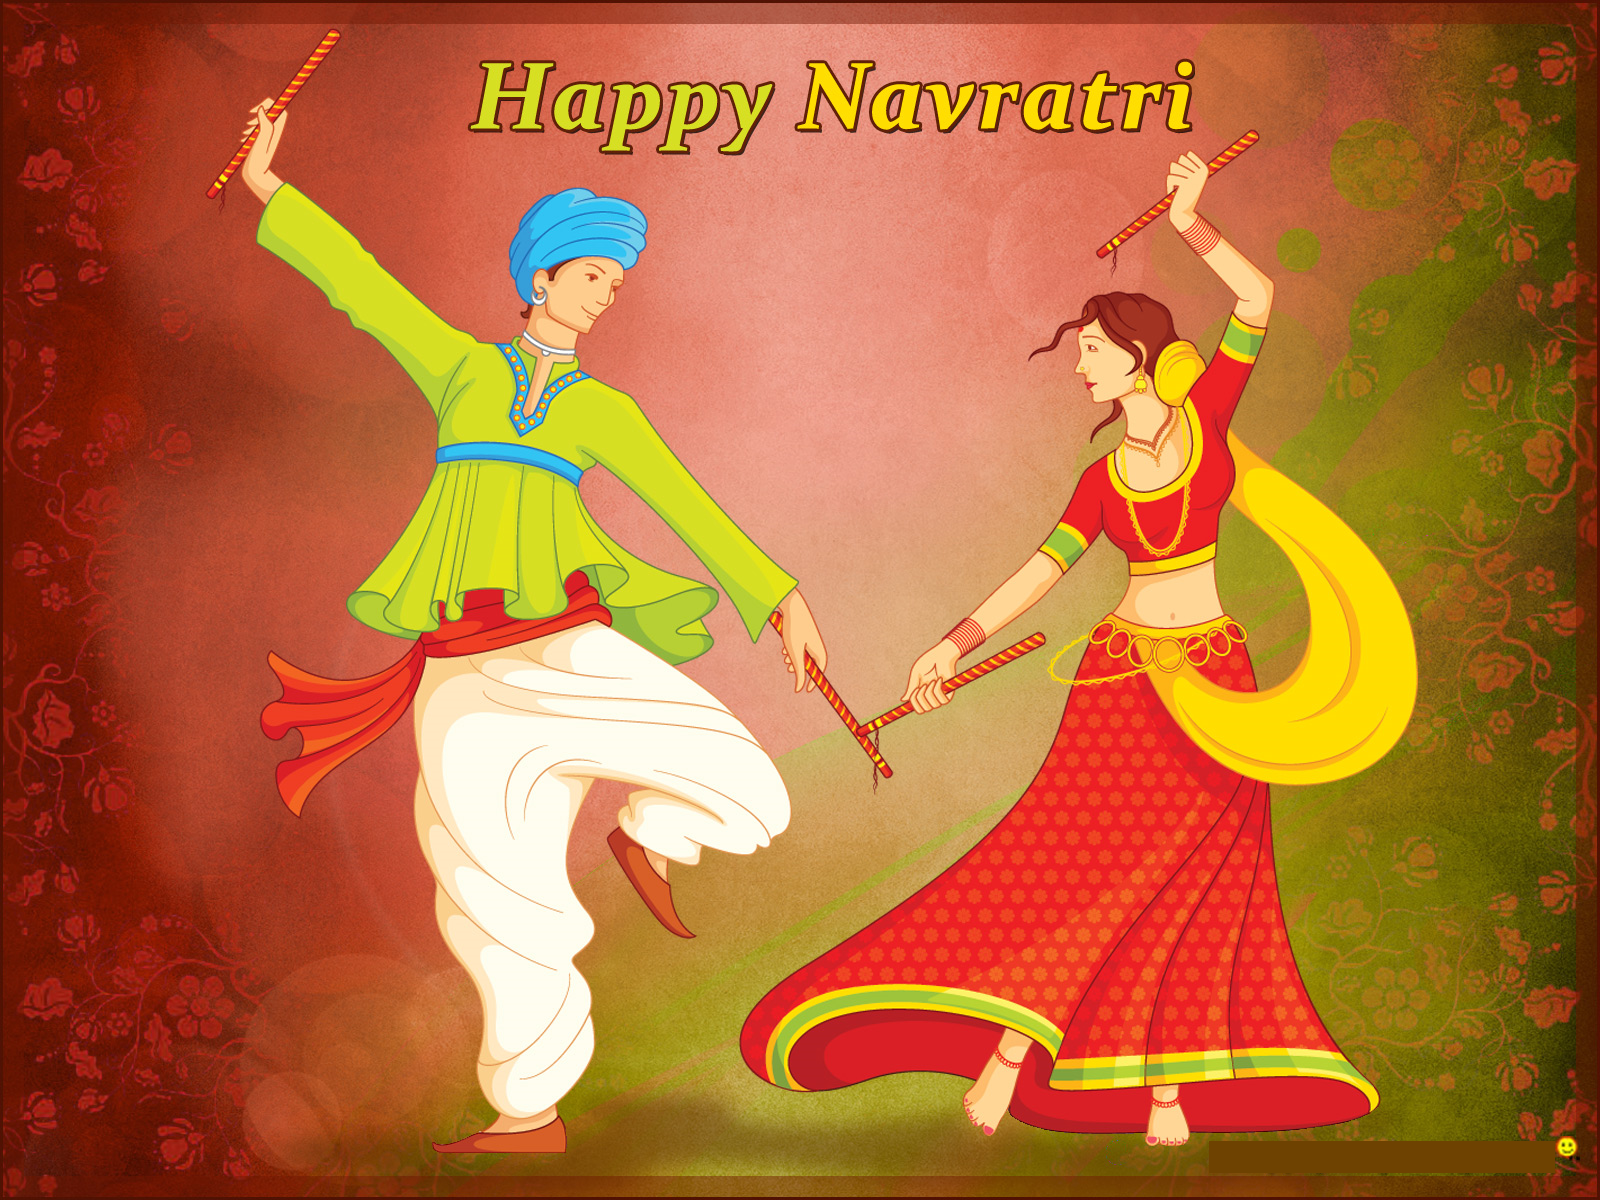 Happy Navaratri Wishes HD Wallpapers, Desktop Images, Mobile Photos